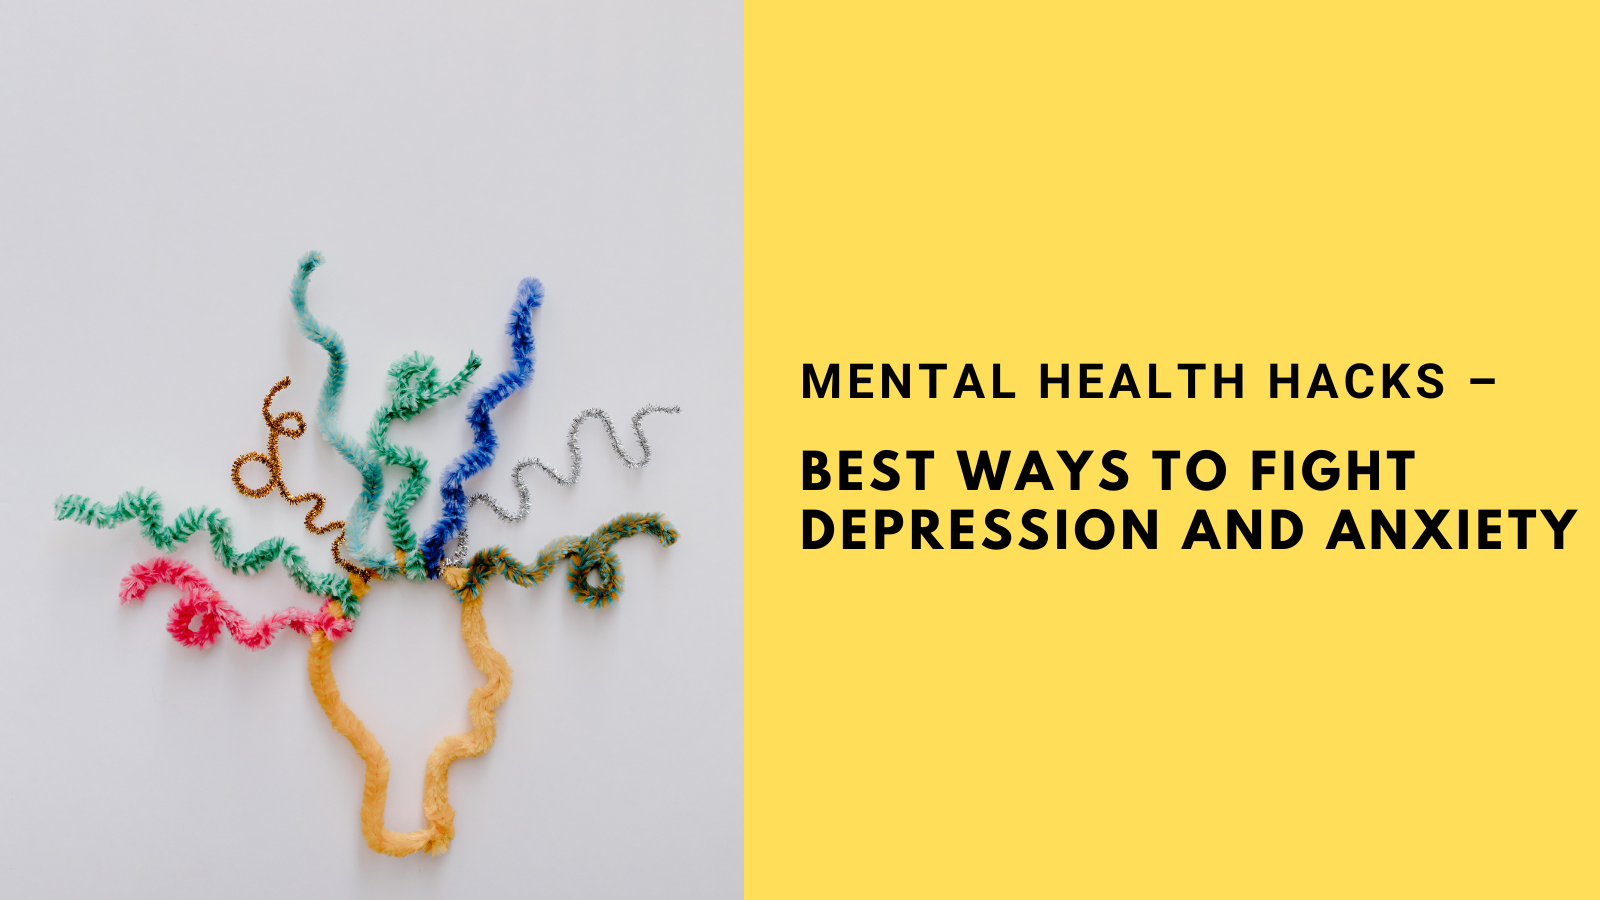 Mental Health Hacks - Best Ways to Fight Depression and Anxiety